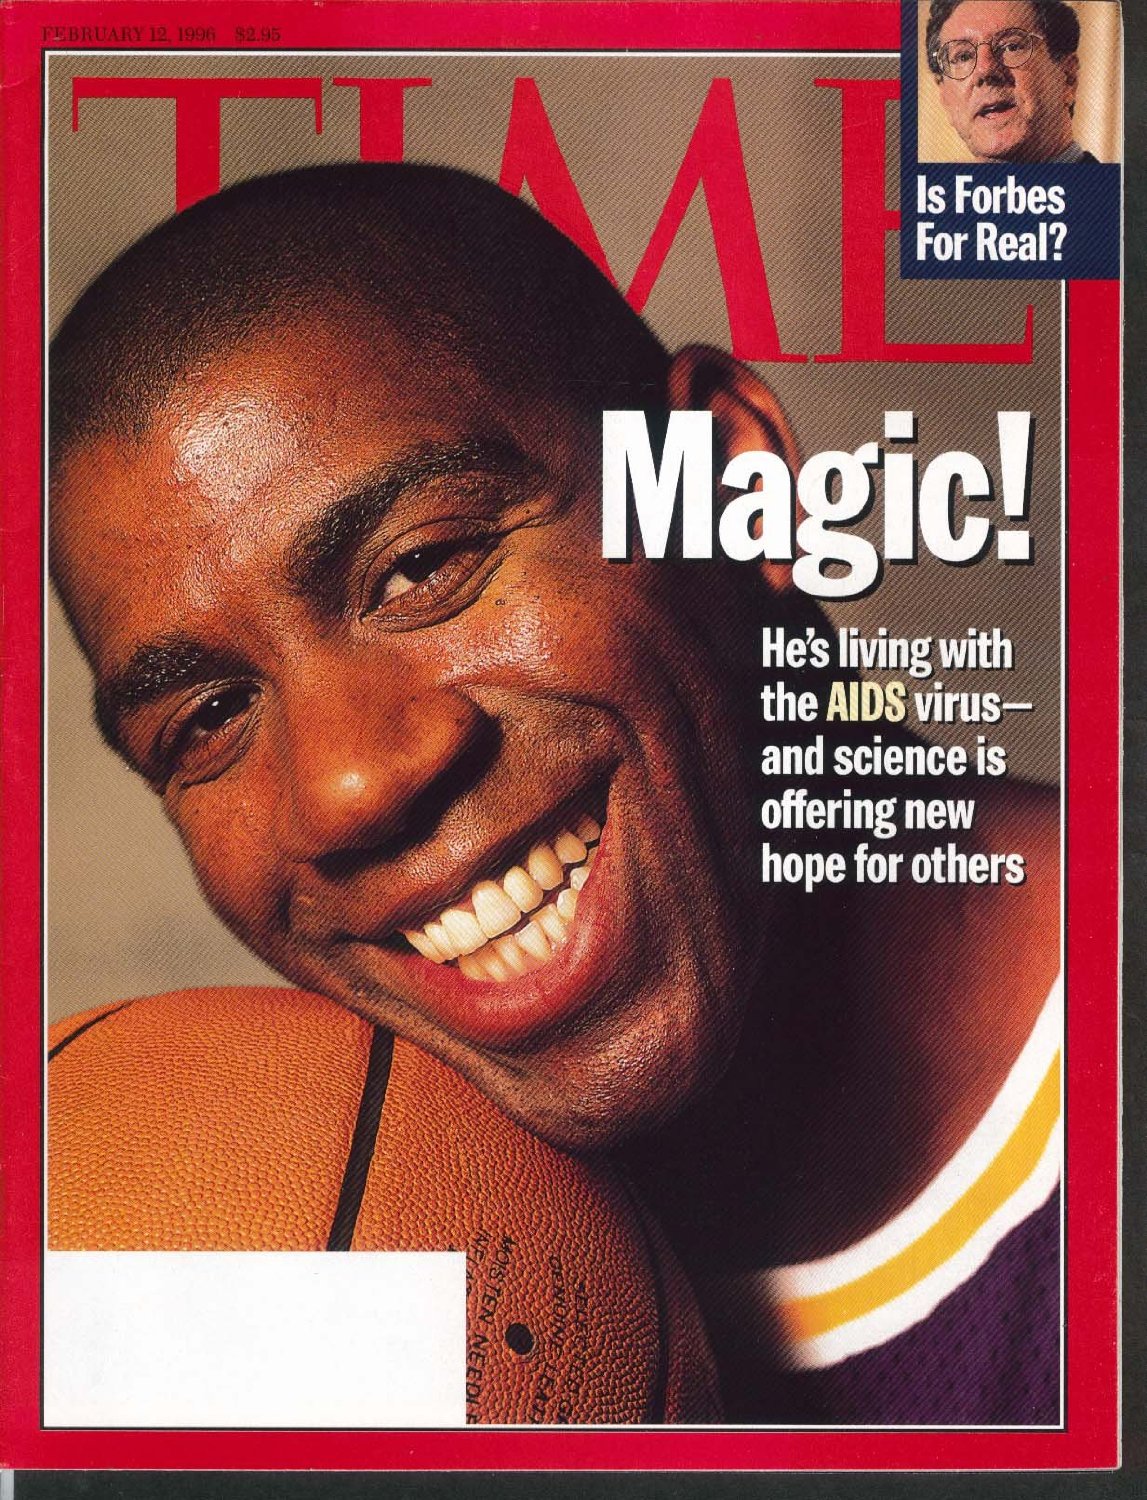 The most memorable sports moment from the '90s Magic Johnson announces